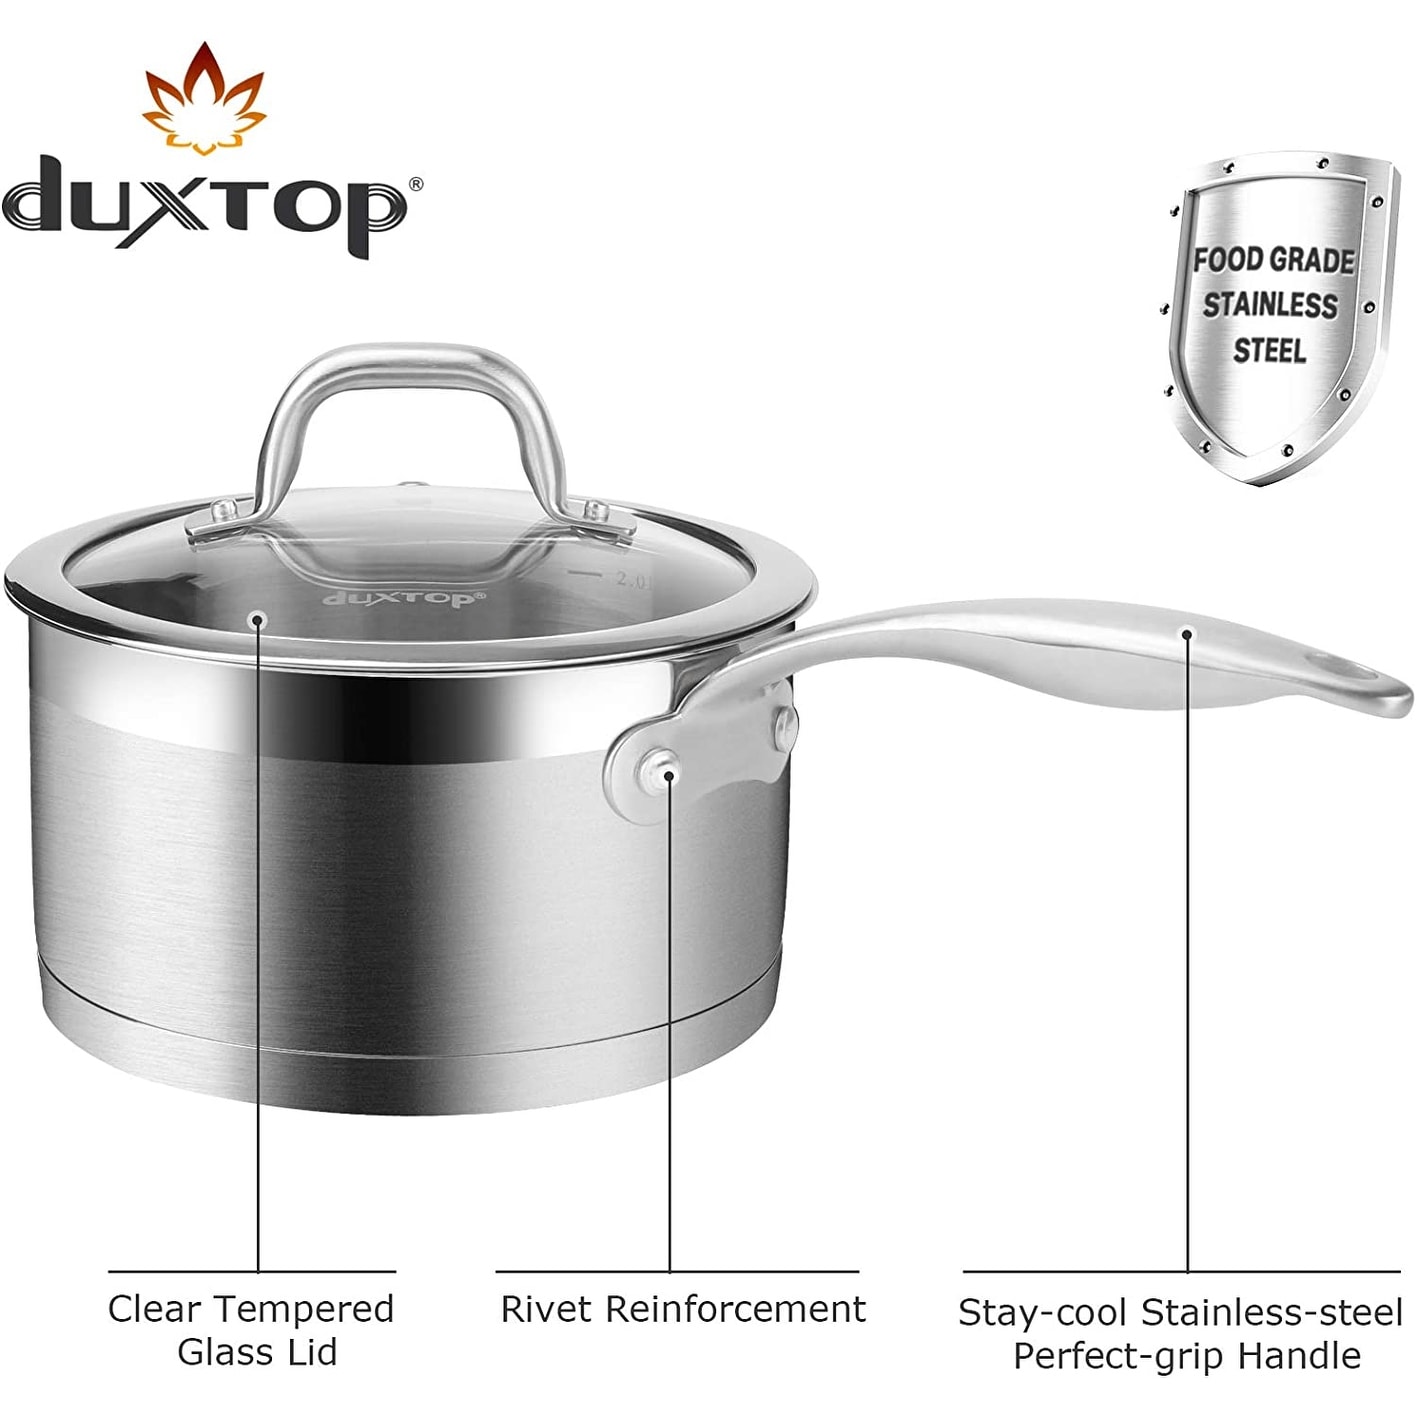 Duxtop Professional Stainless Steel Sauce Pan with Lid, Kitchen Cookware, Induction Pot with Impact-bonded Base Technology, 2.5 Quart